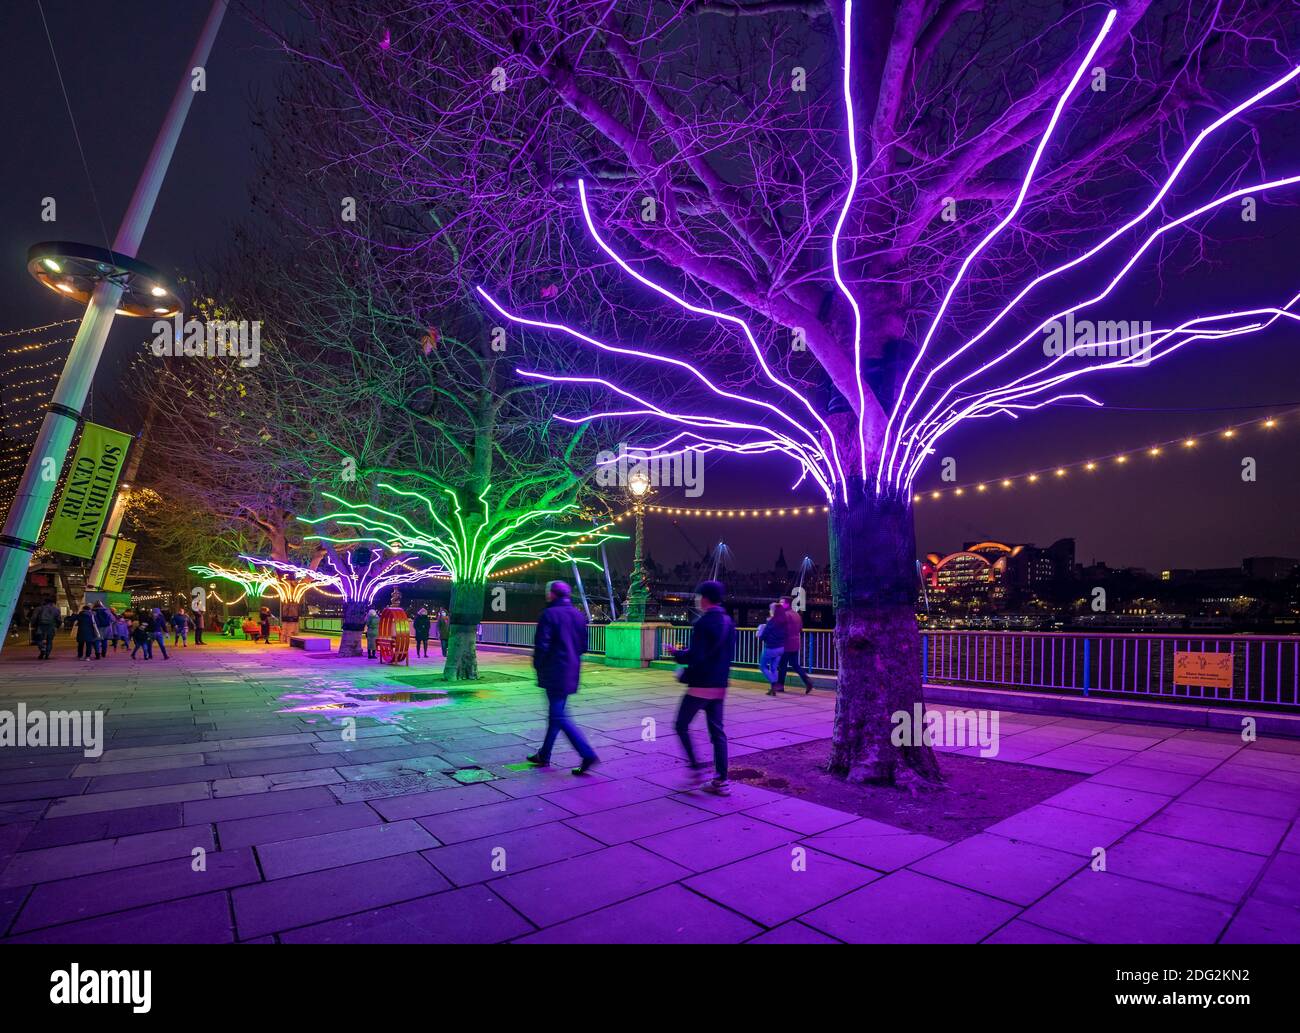 London, UK. 7th Dec 2020. “Winter Light” at Southbank Centre.  "Lumen", trees illuminated with glowing neon flex by artist David Ogle. Over 15 artworks and new illuminated commissions by a range of leading international artists feature during "Winter Light" located around the Southbank buildings and Riverside Walk until the end of February 2021. Credit: Guy Corbishley/Alamy Live News Stock Photo